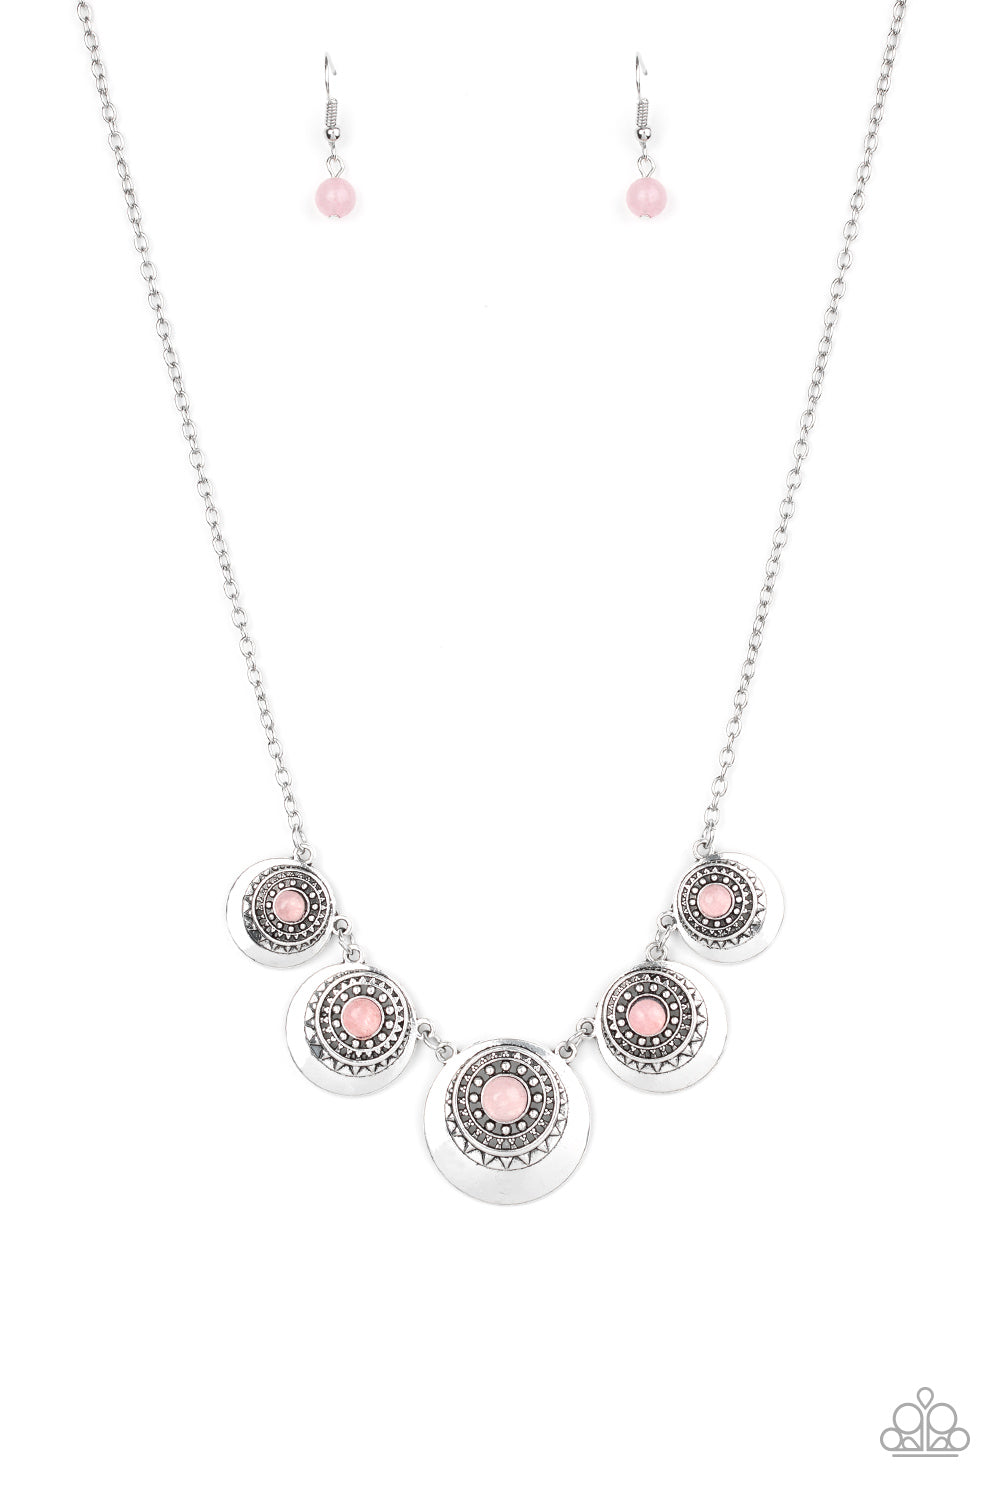 SOLAR BEAM - PINK NECKLACE